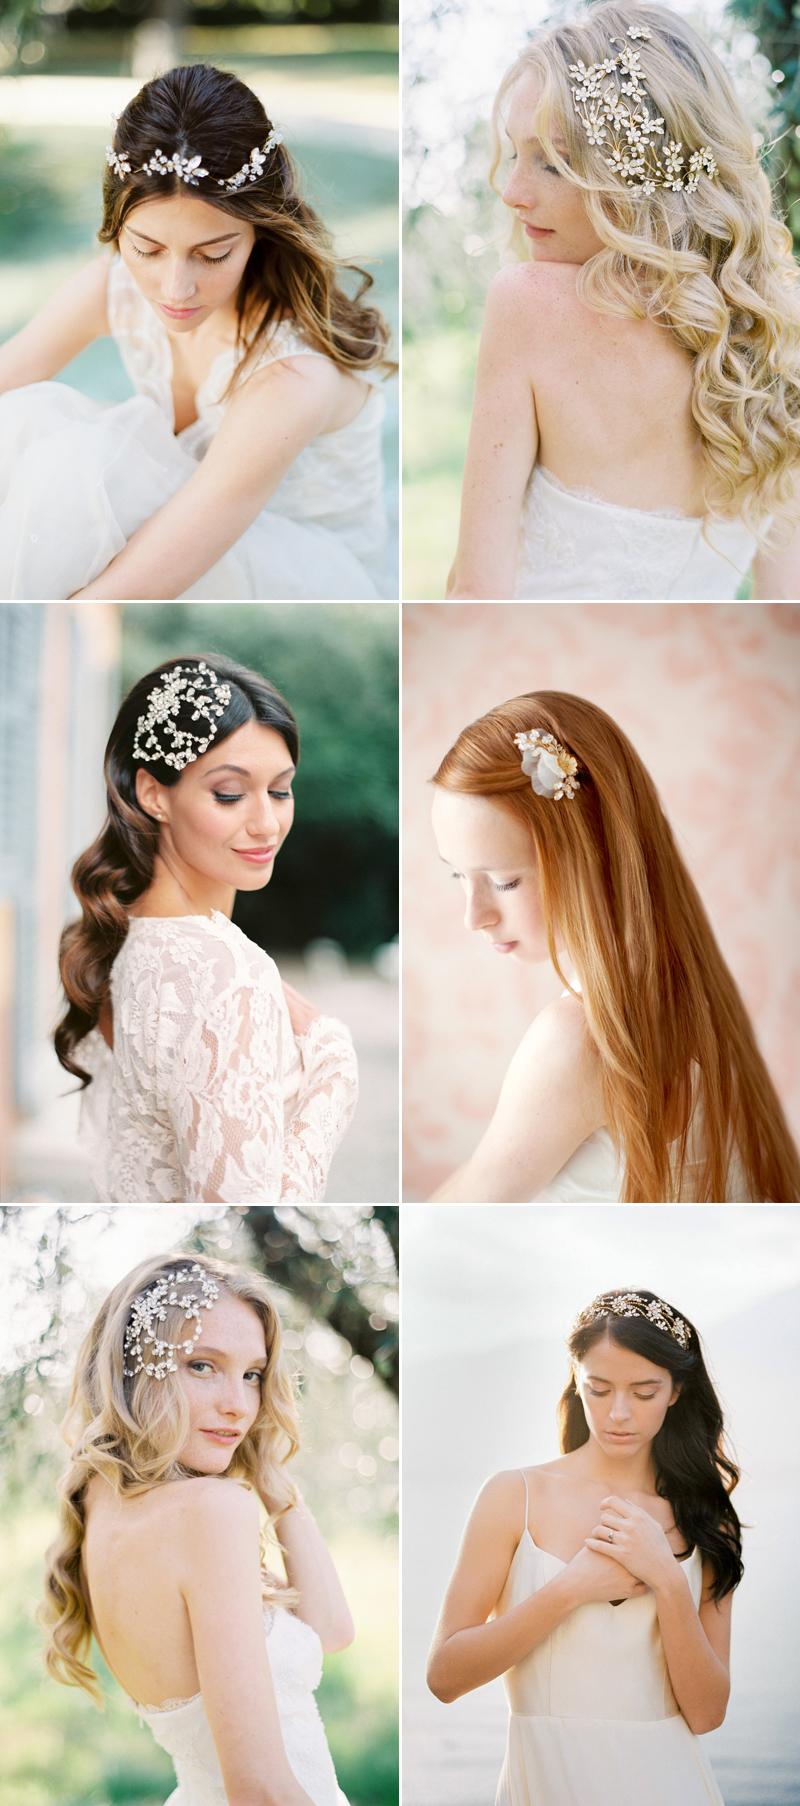 30 Ways to Wear Your Hair Down for Your Wedding